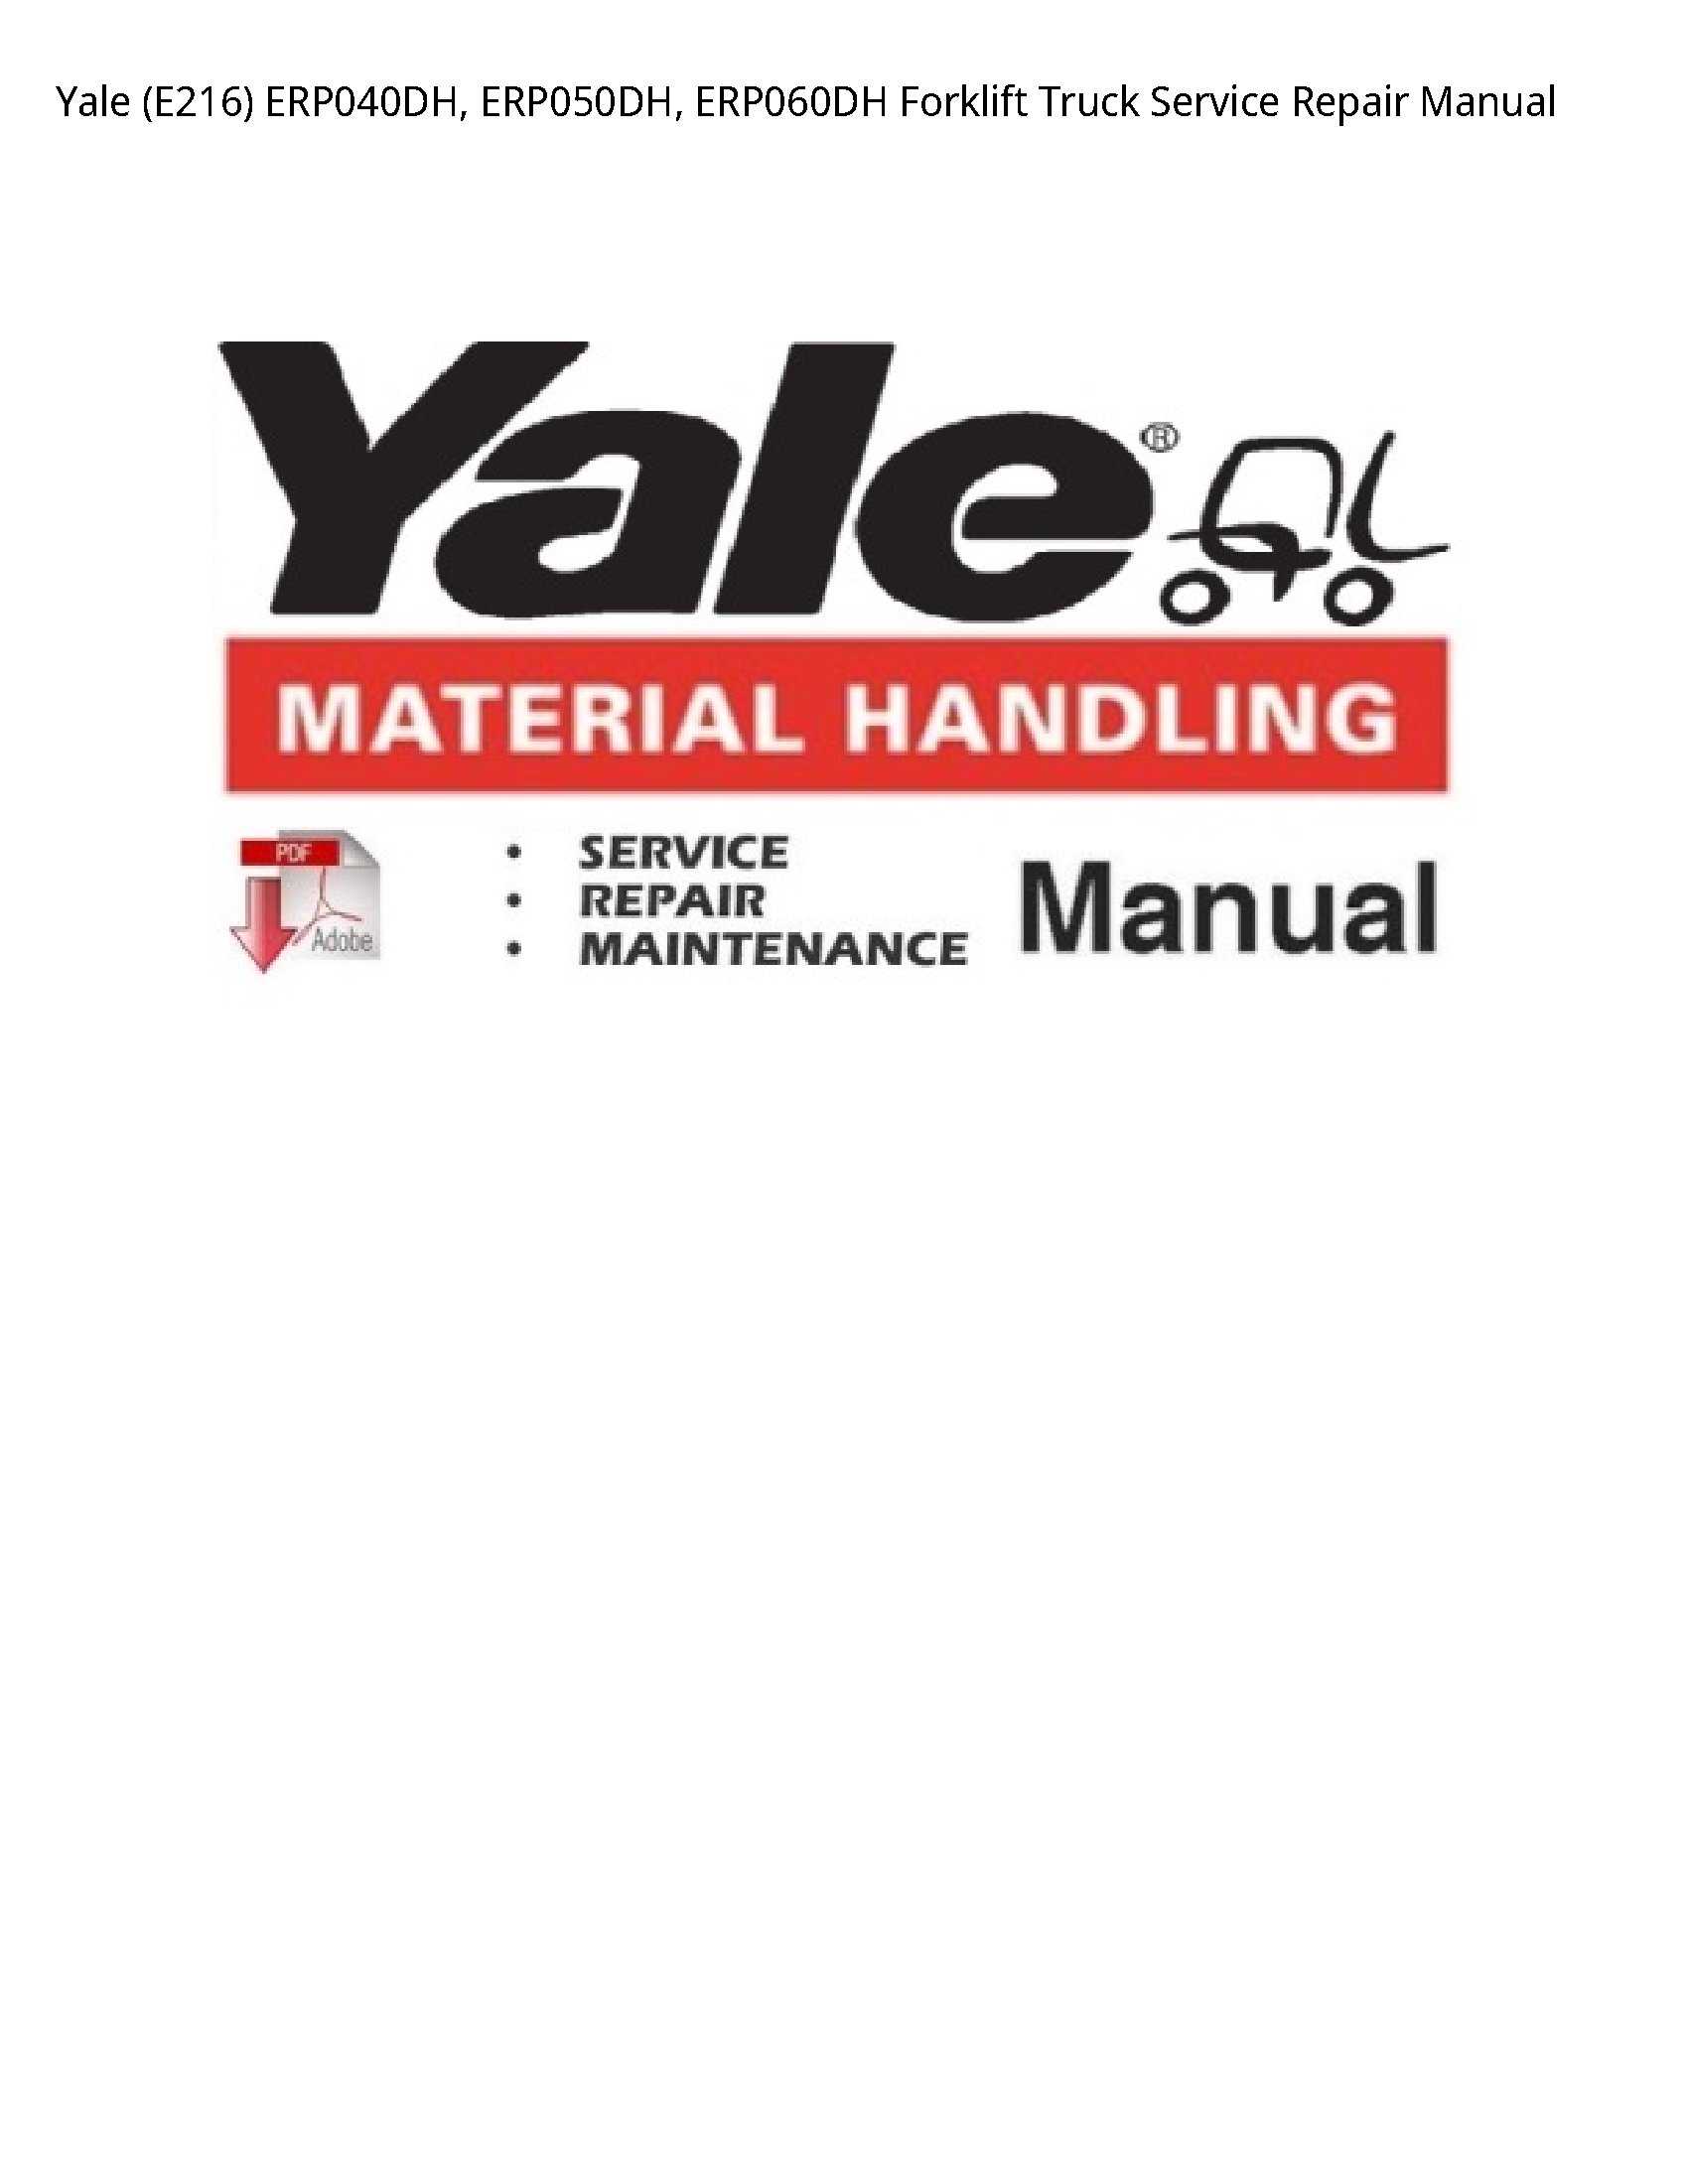 Yale (E216) Forklift Truck manual